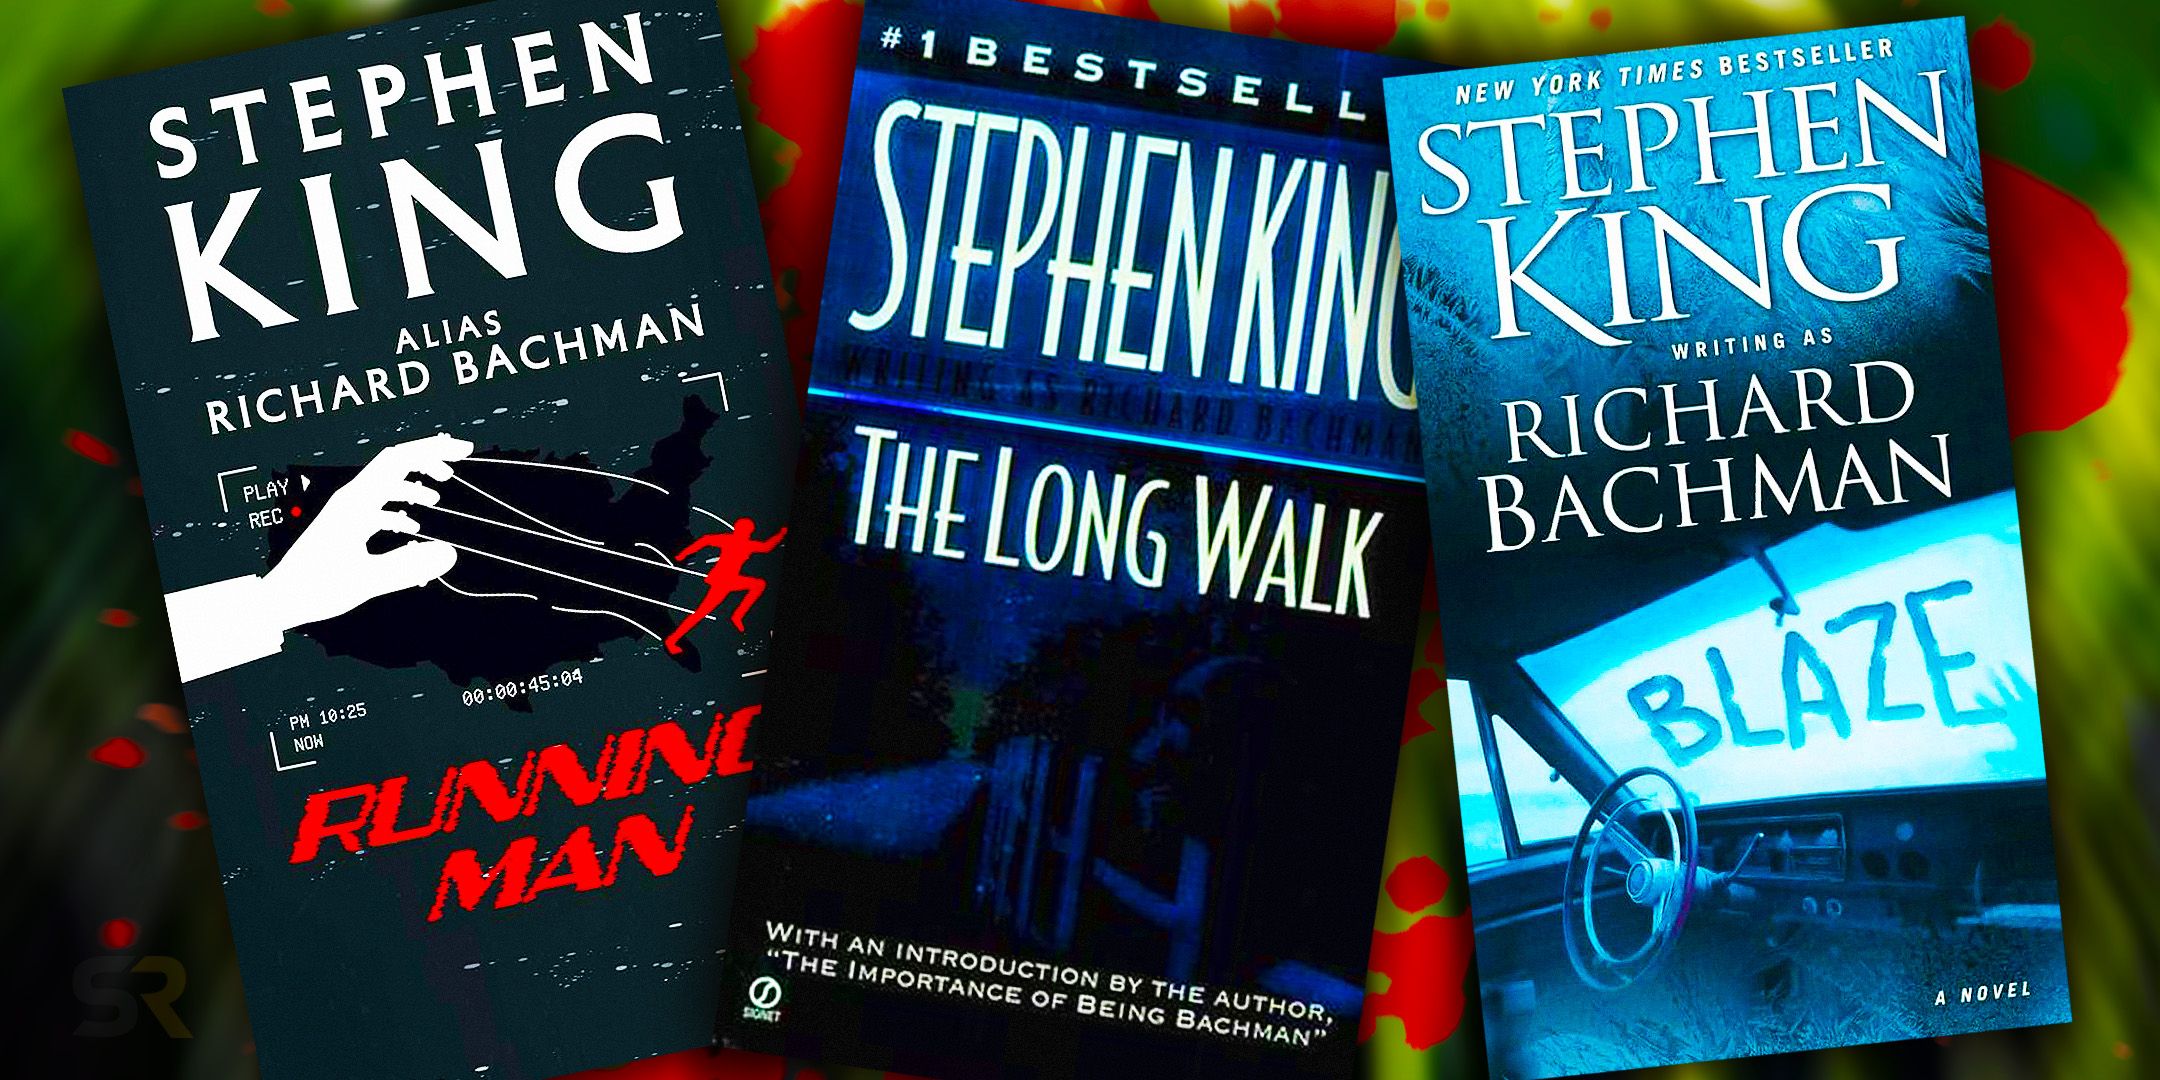 Collage of book covers for Stephen King's Running Man, The Long Walk, and Blaze